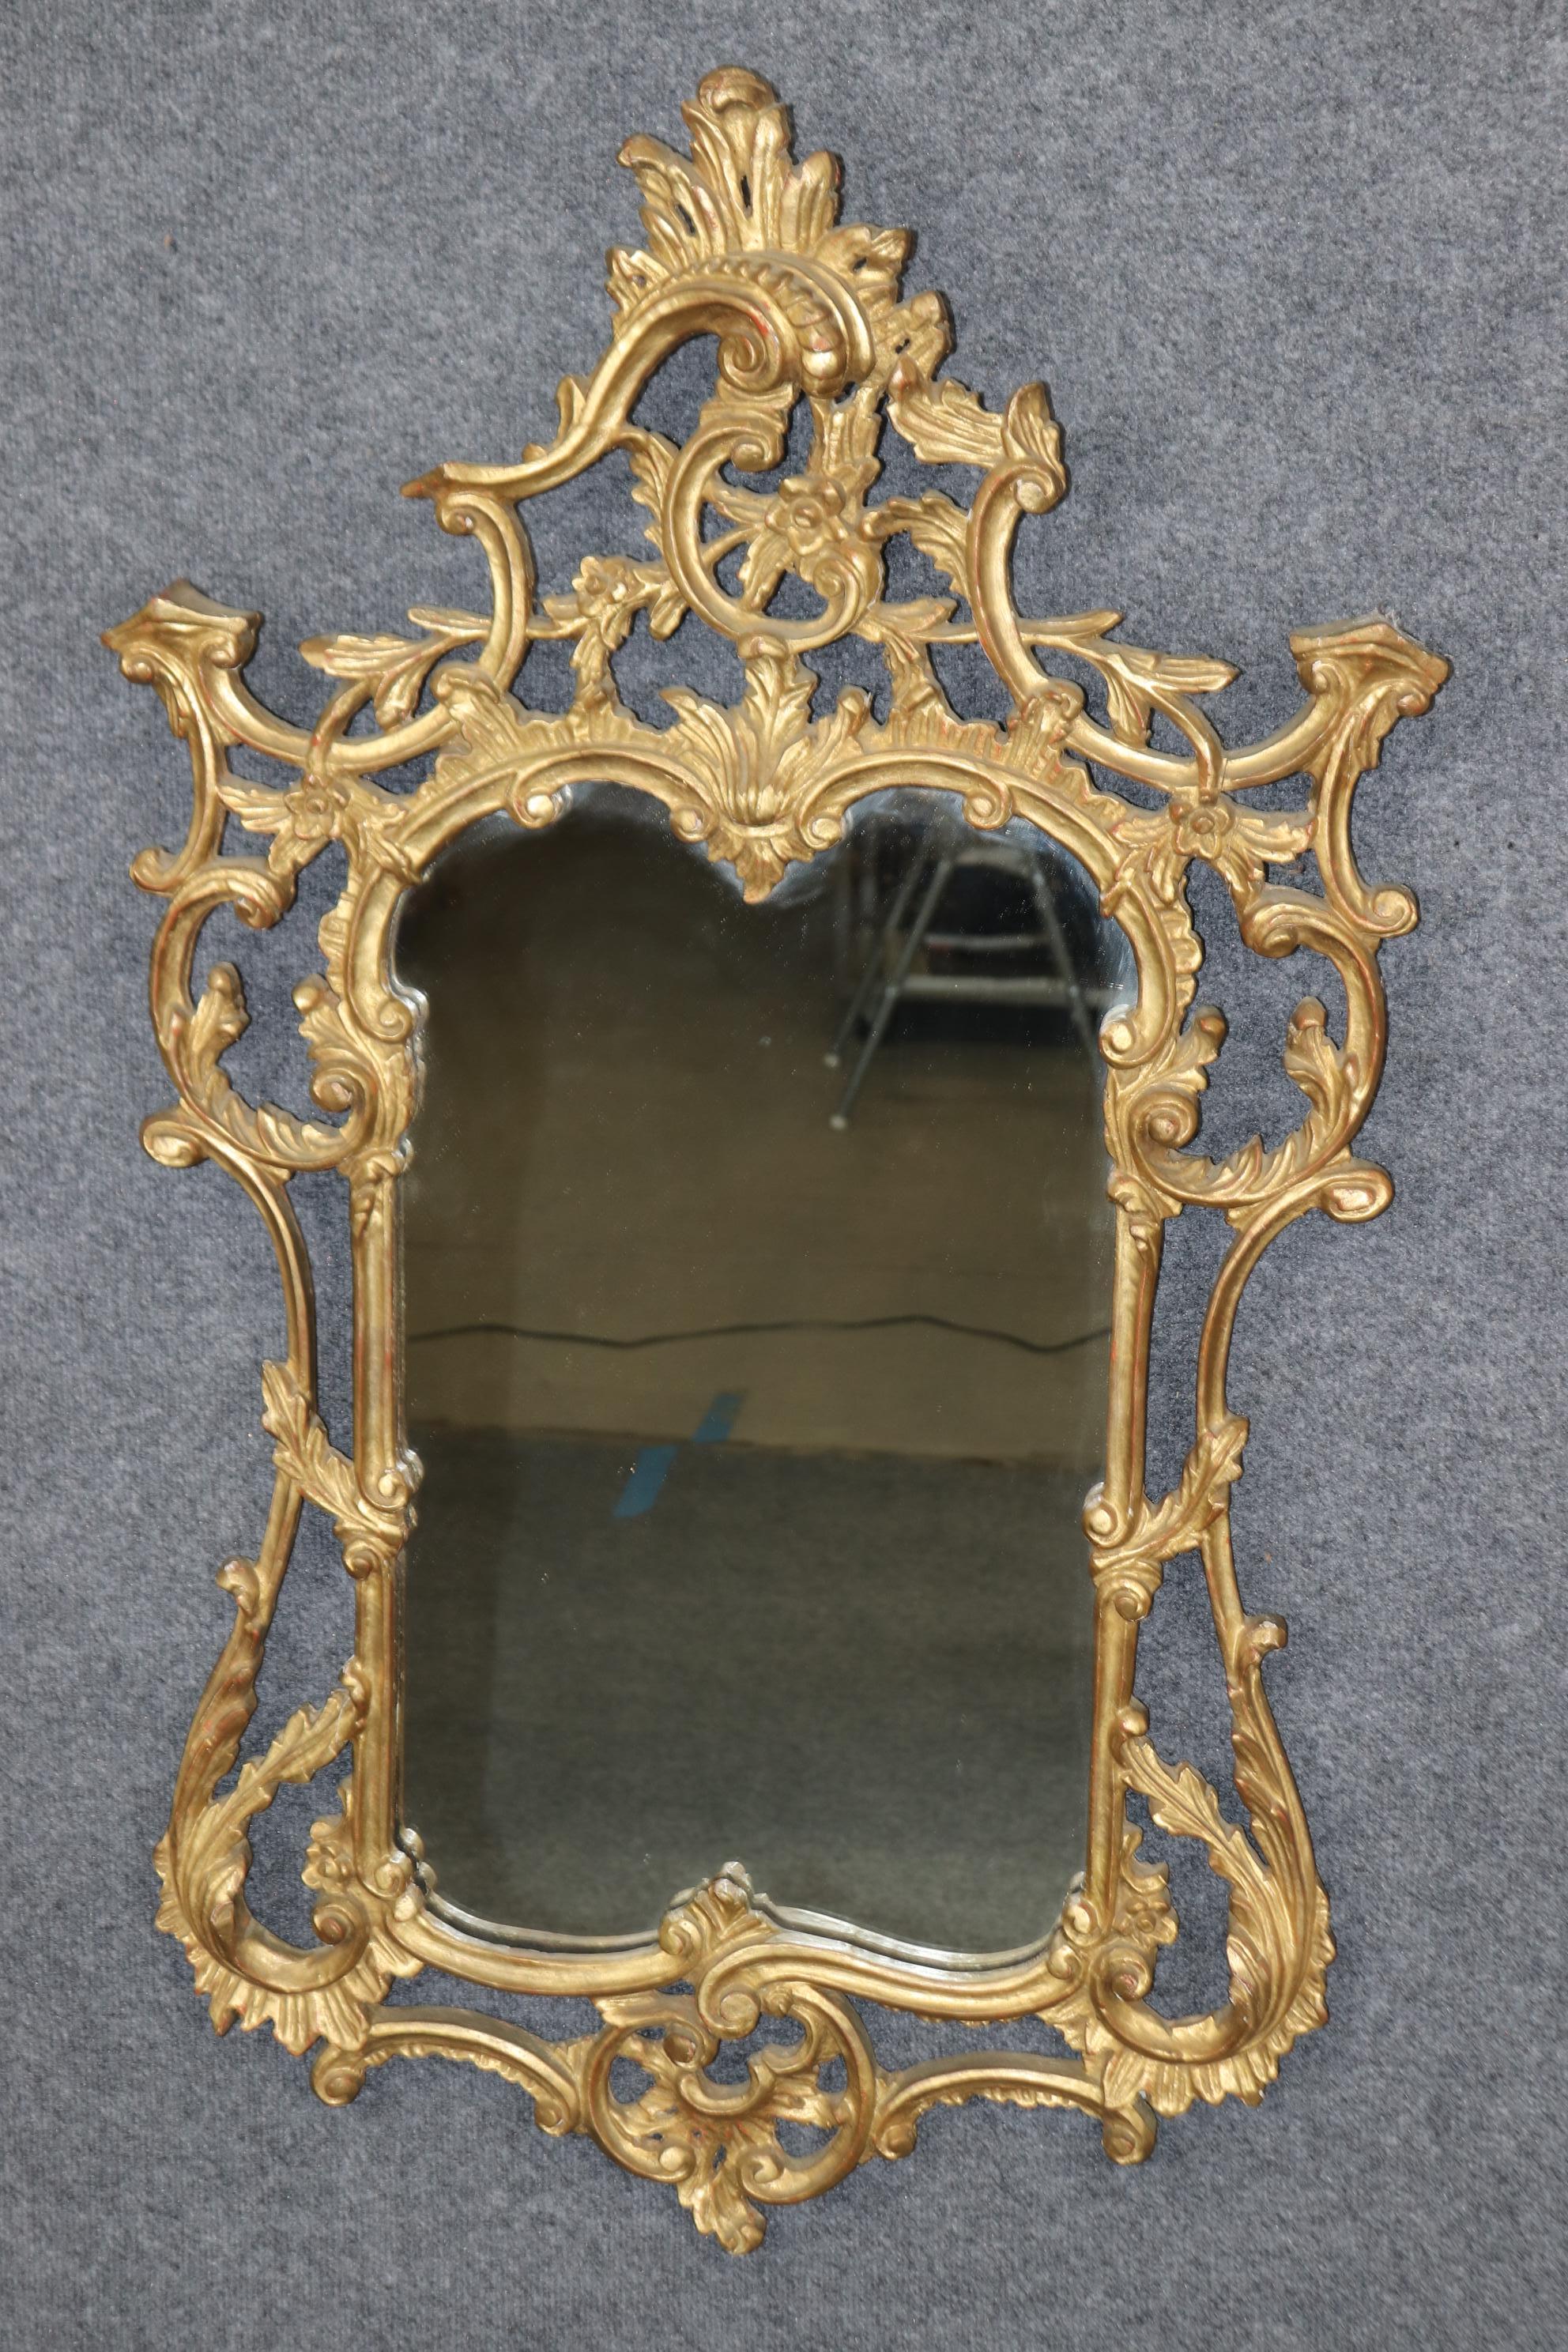 This is a superb pair of carved wood, not gesso, Italian-made mirrors with genuine parcel gold leaf frames and clear mirror plate glass mirrors. The mirrors are a superb example of French Louis XV or possibly Rococo styling and have a time-worn